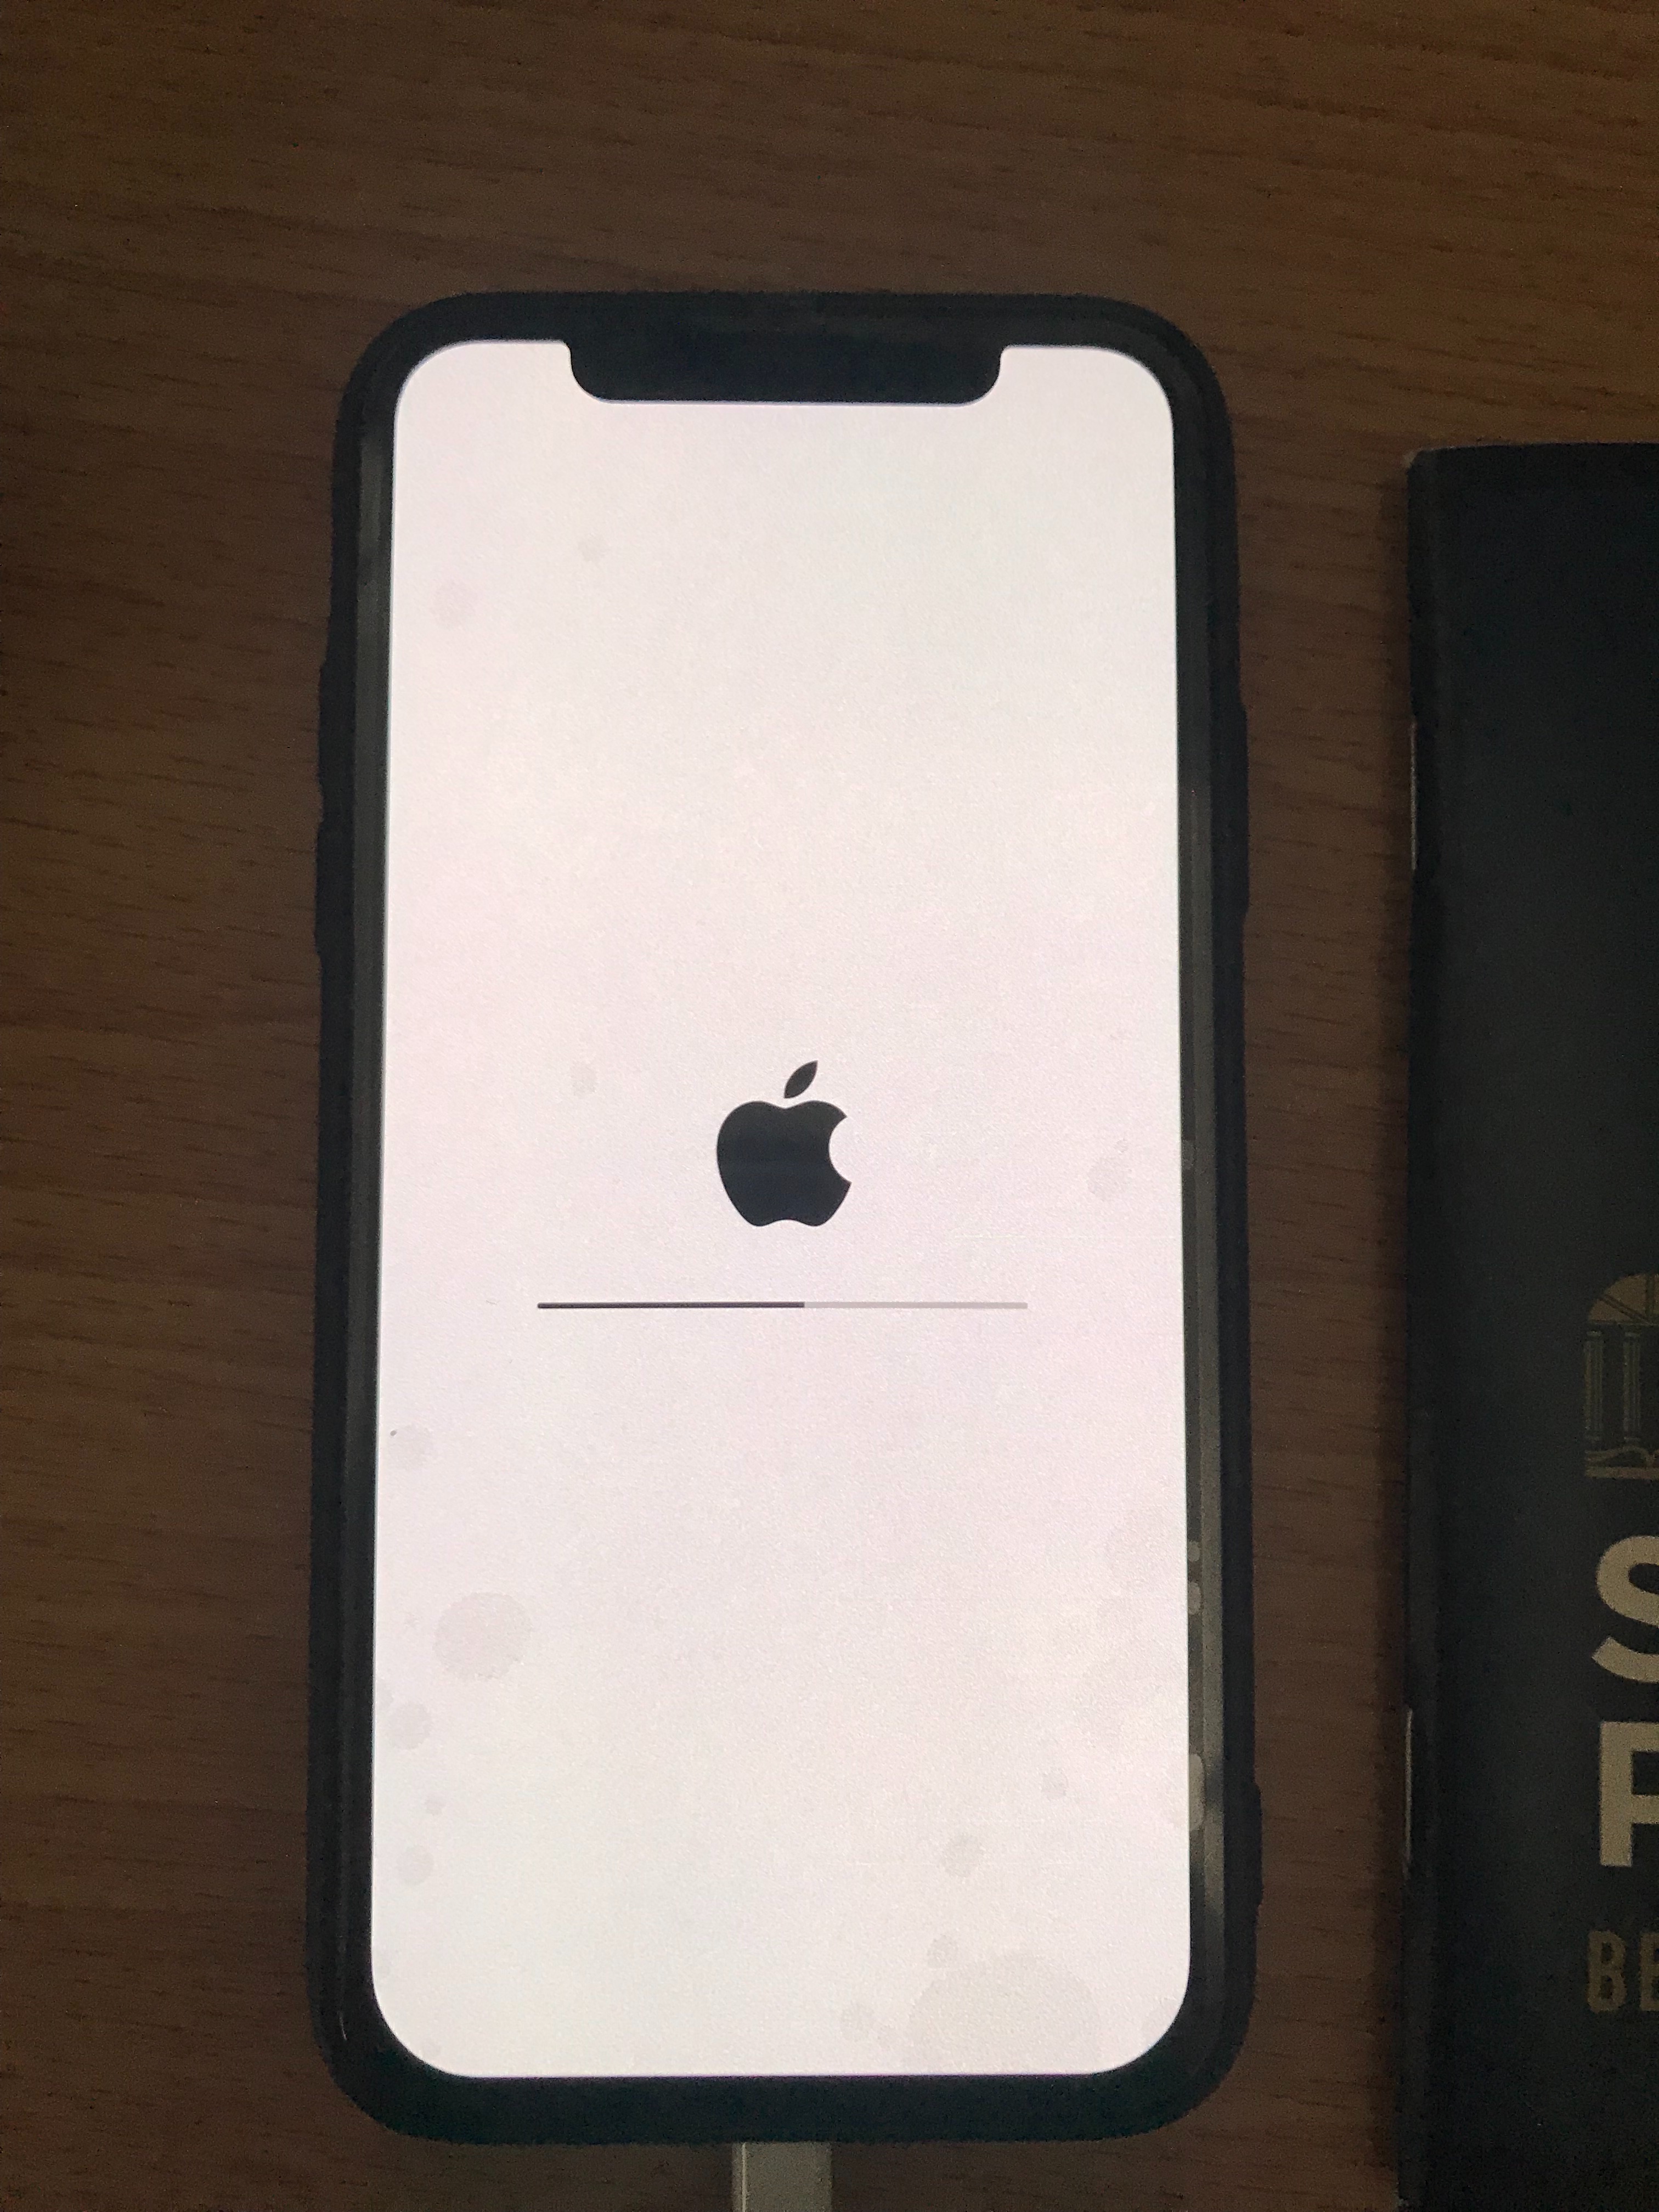 Iphone X Freezes After Entering Passcode Apple Community